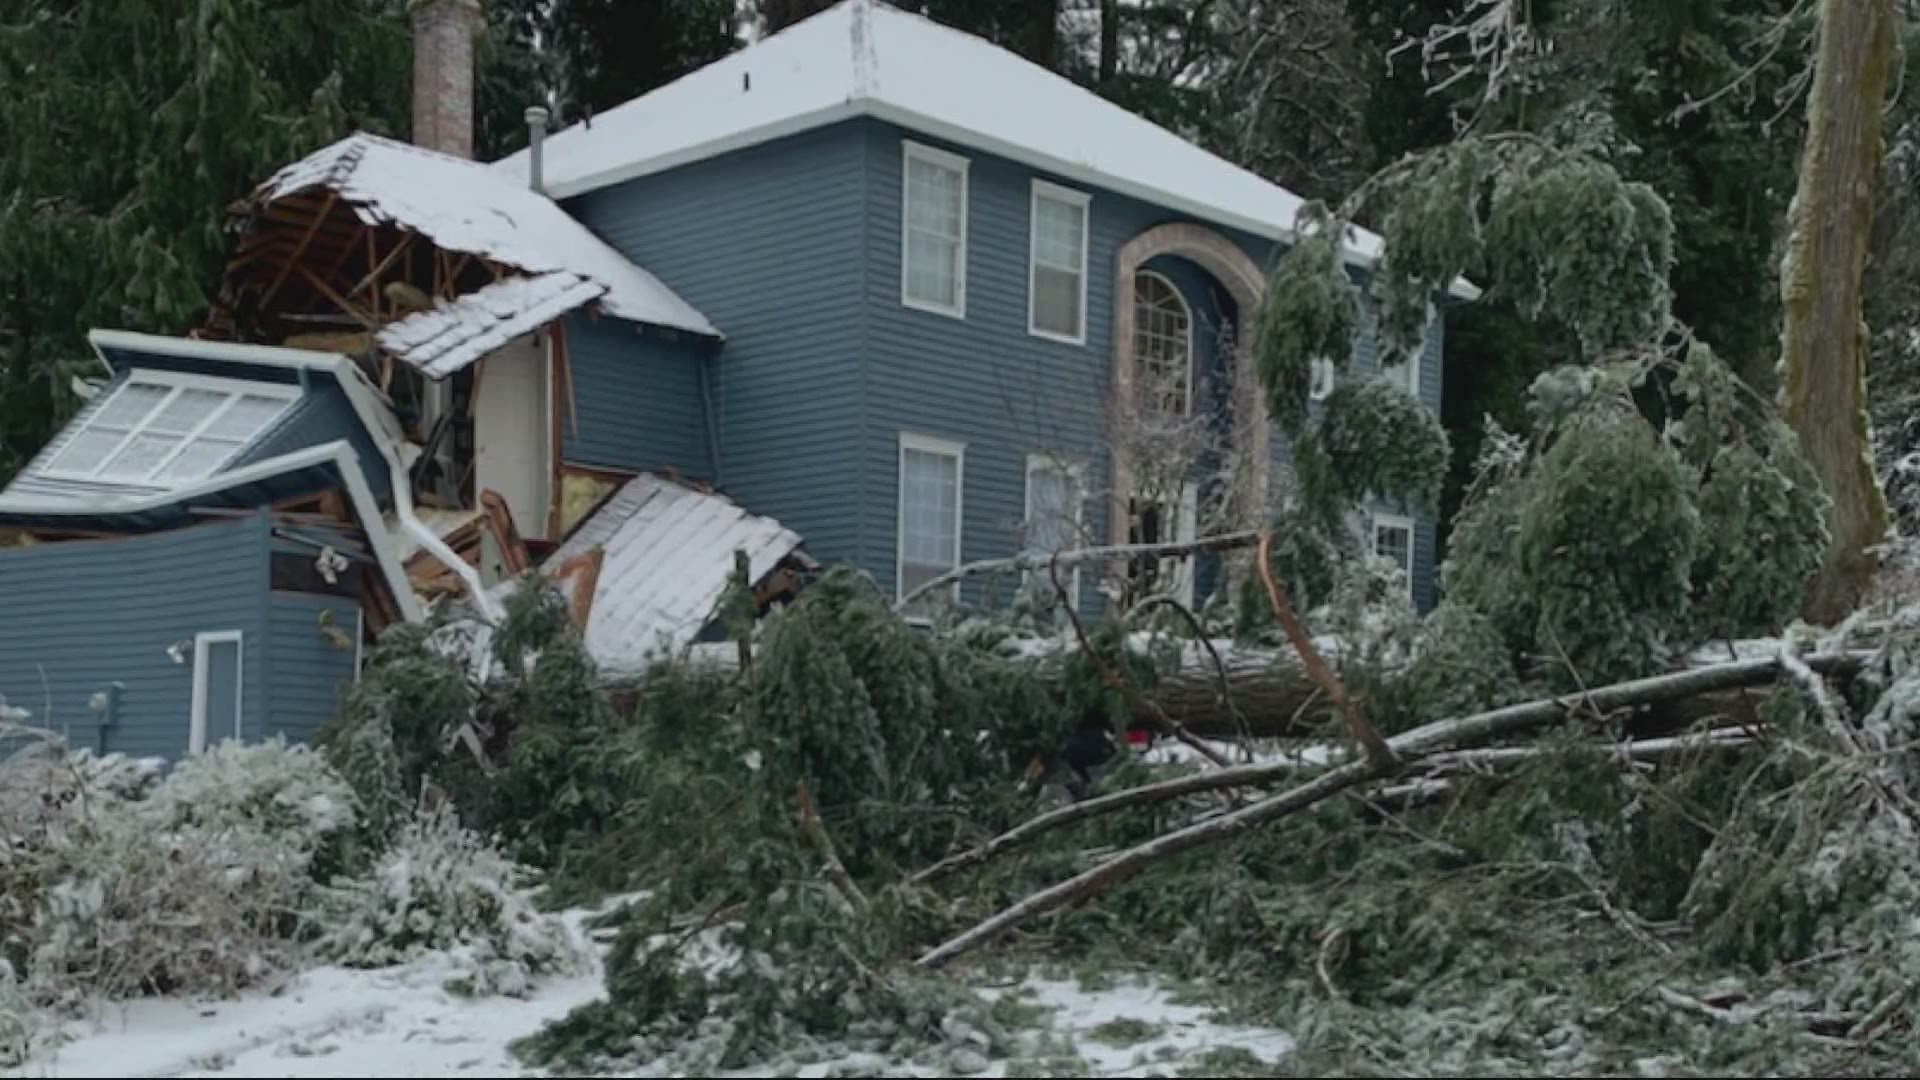 People in a Lake Oswego neighborhood say they haven’t had internet since the winter storm nearly a month ago.